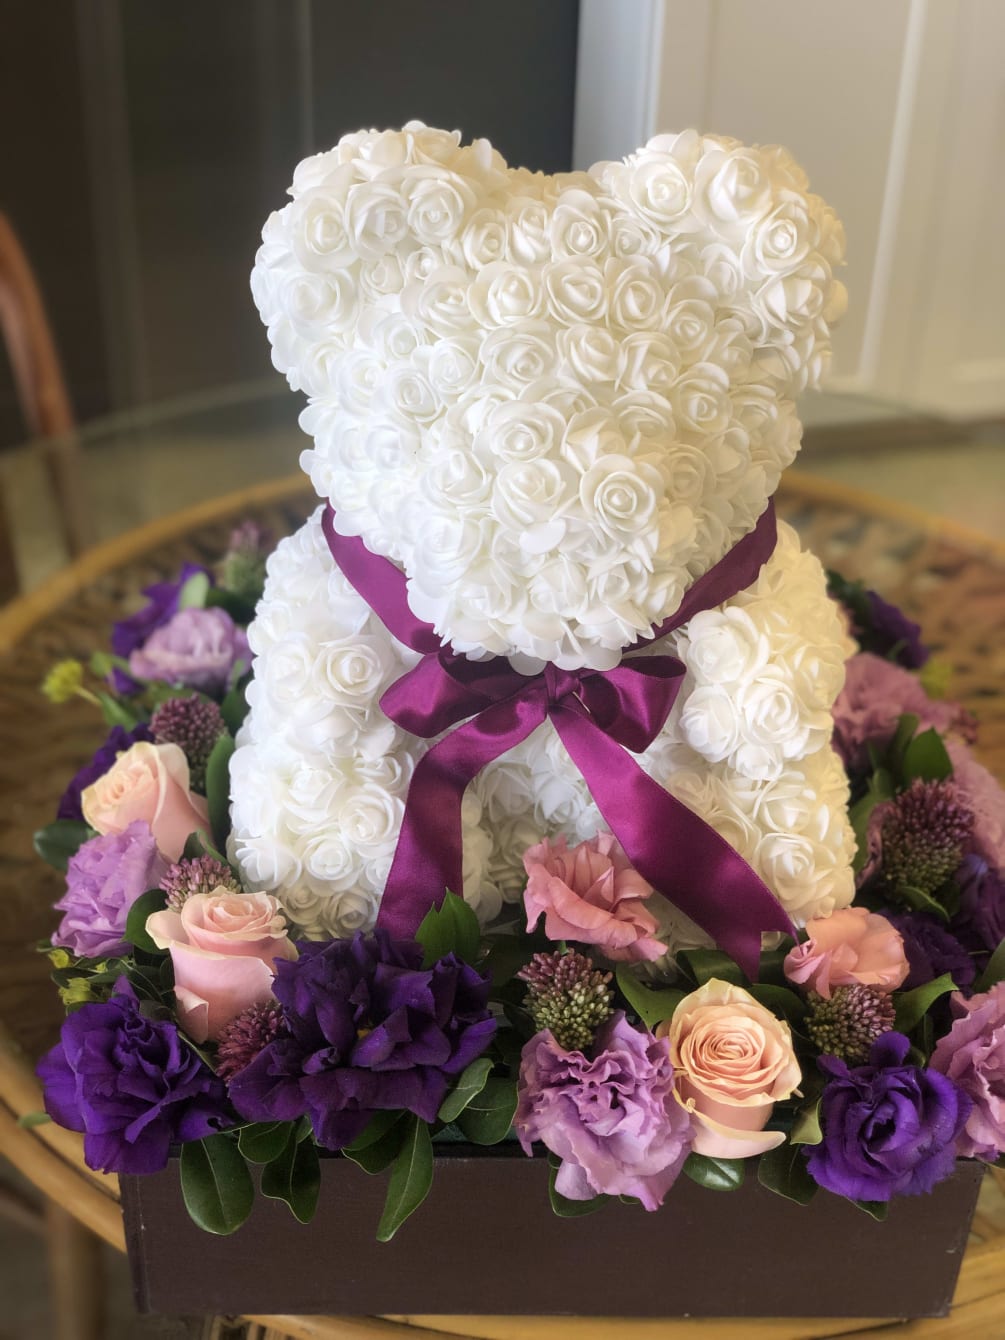 floral arrangements with teddy bears